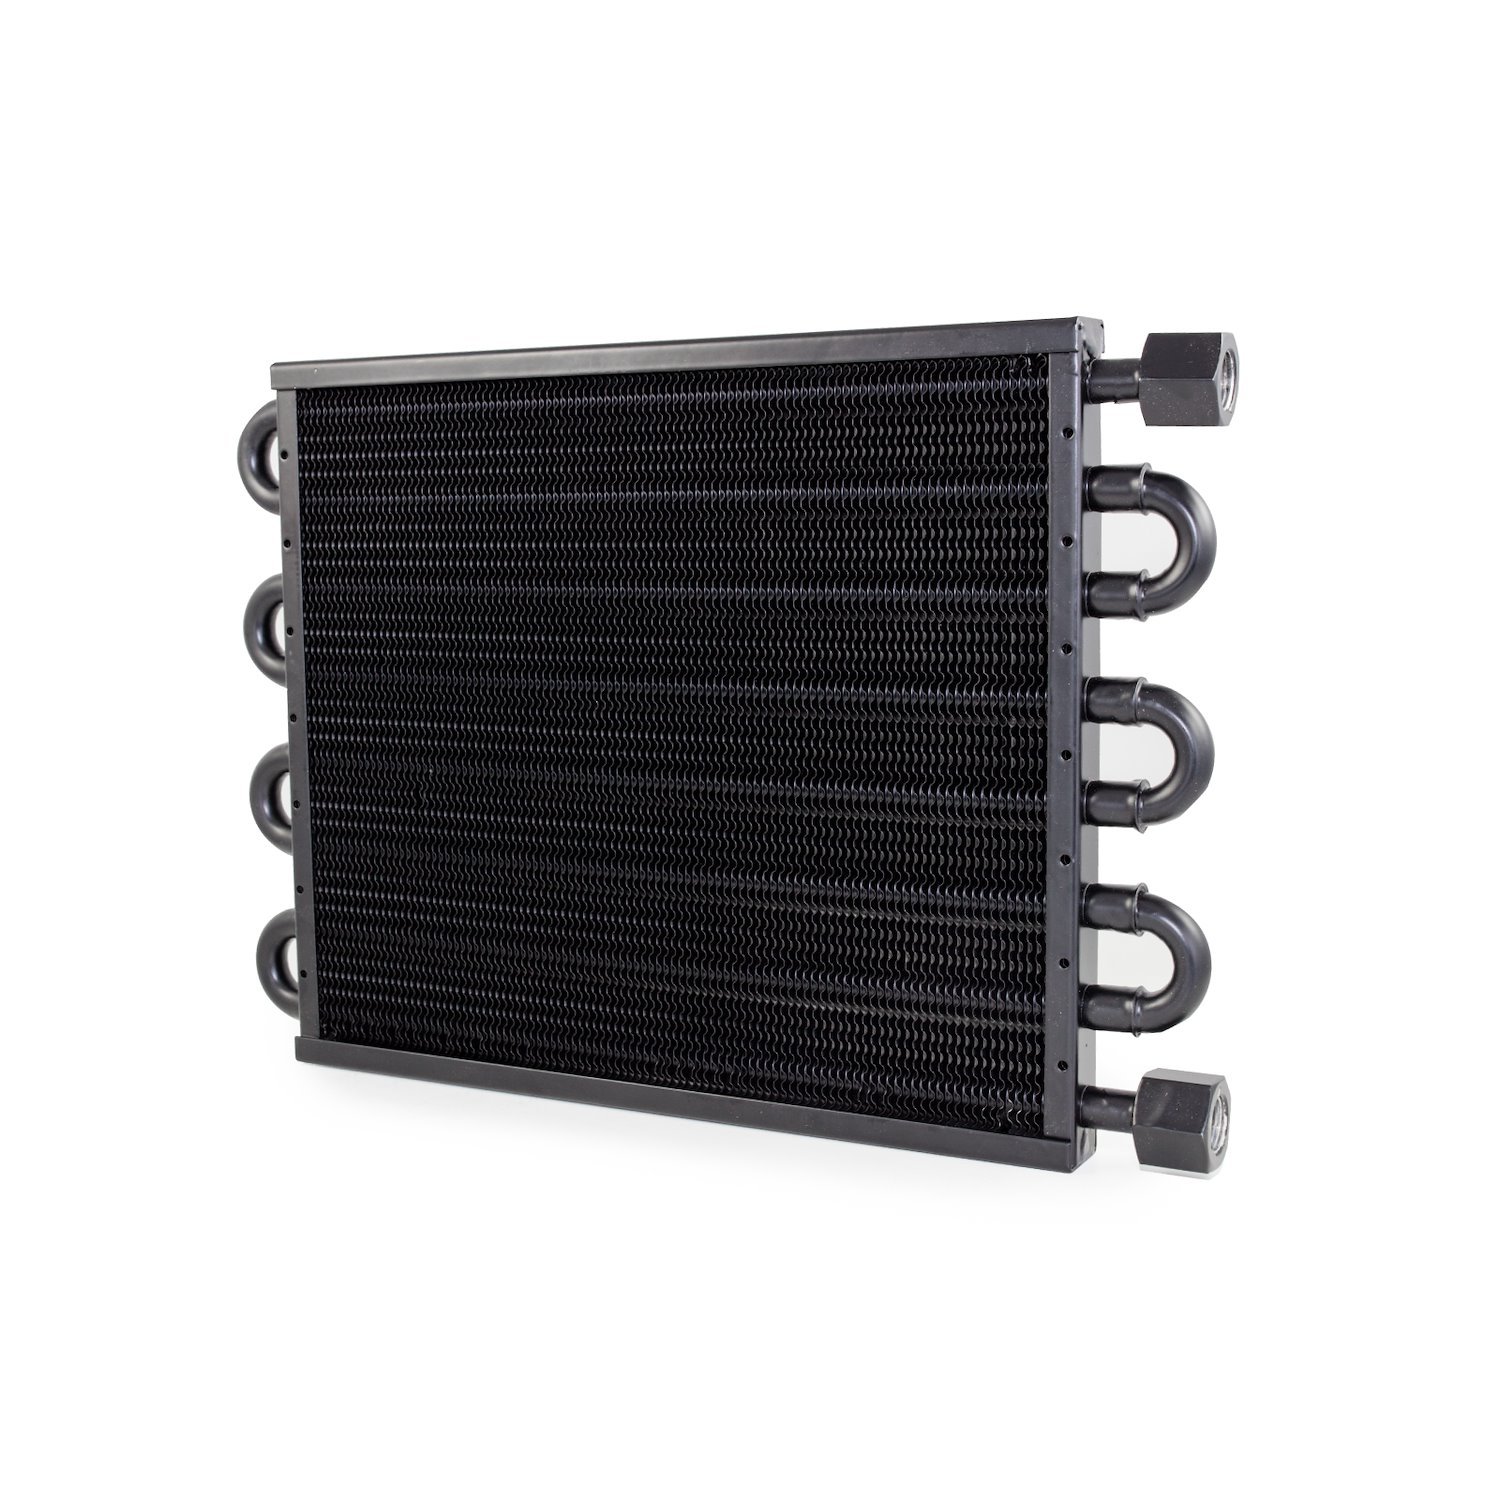 HC6356 Transmission Oil Cooler, 10" x 15 1/2" w/ Flare Fitting